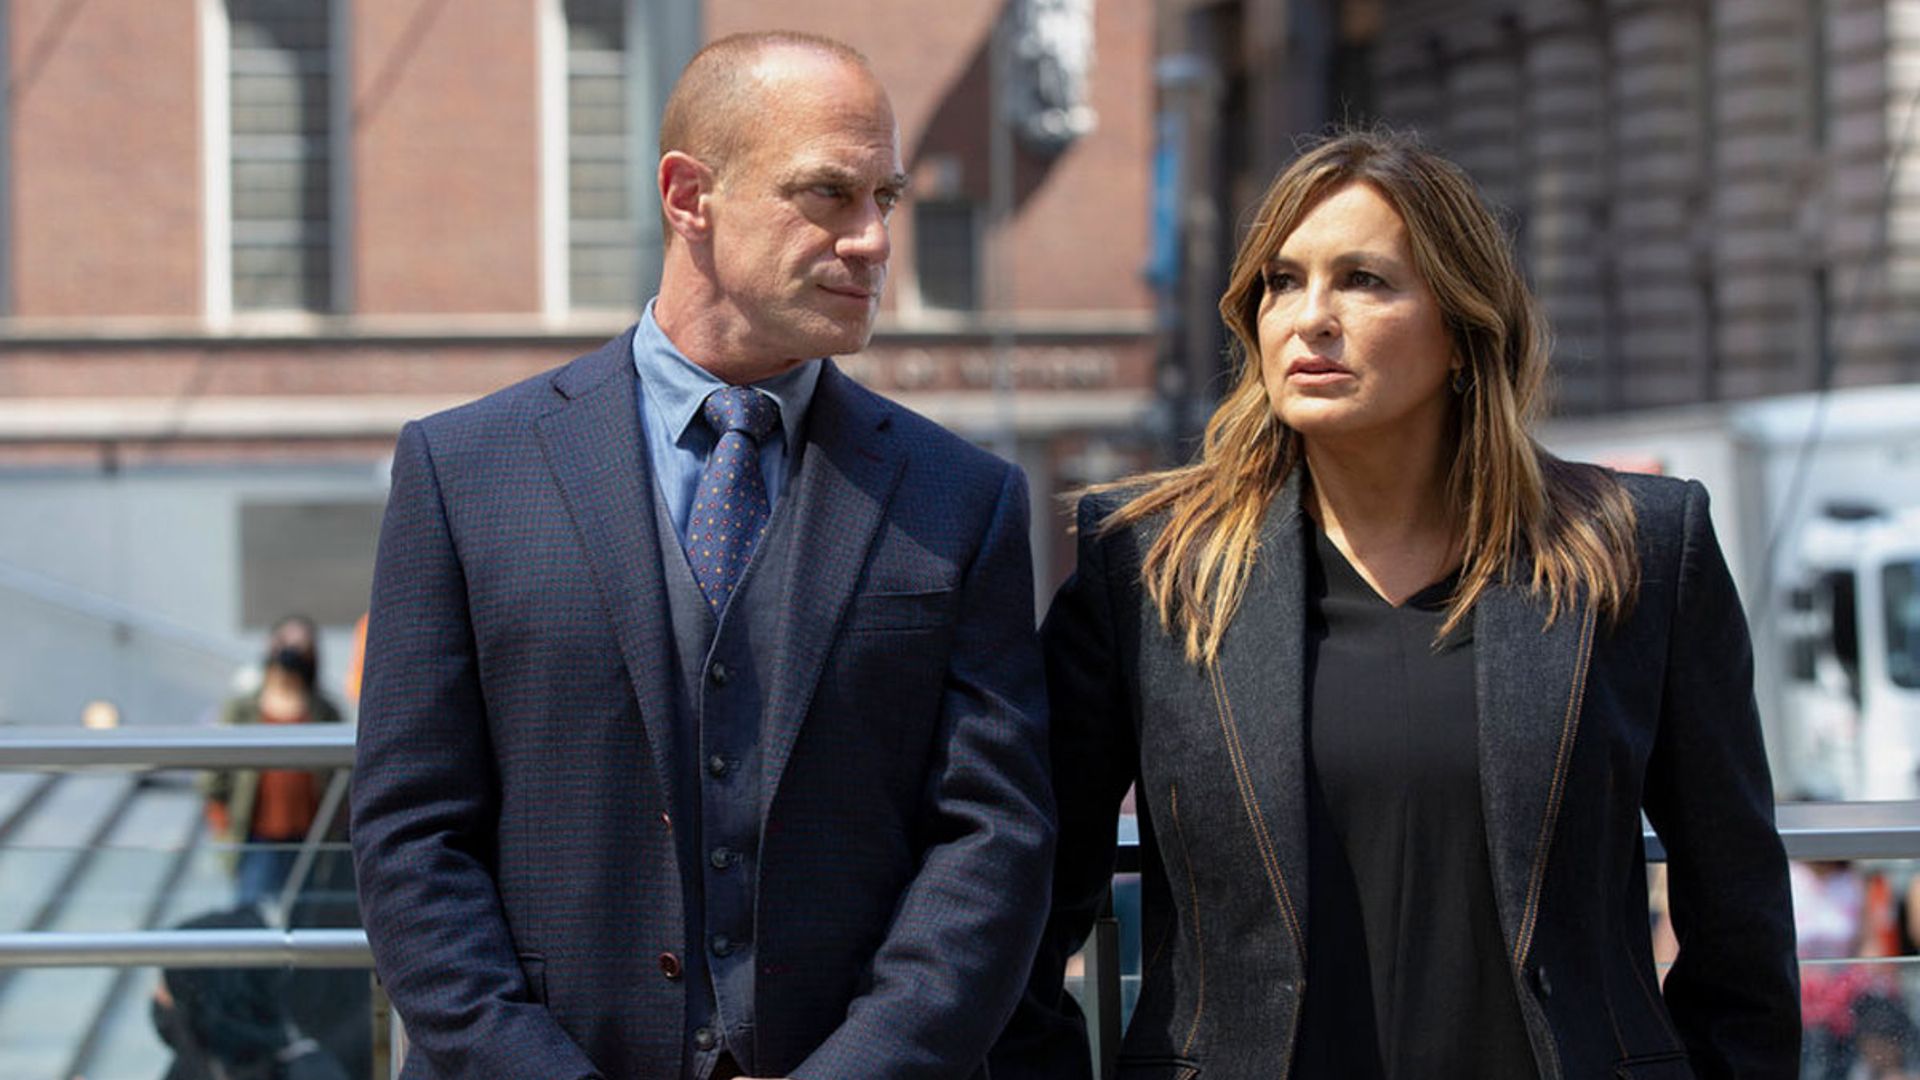 Law & Order: Organized Crime adds new cast members - and one of them is a Chicago PD star!